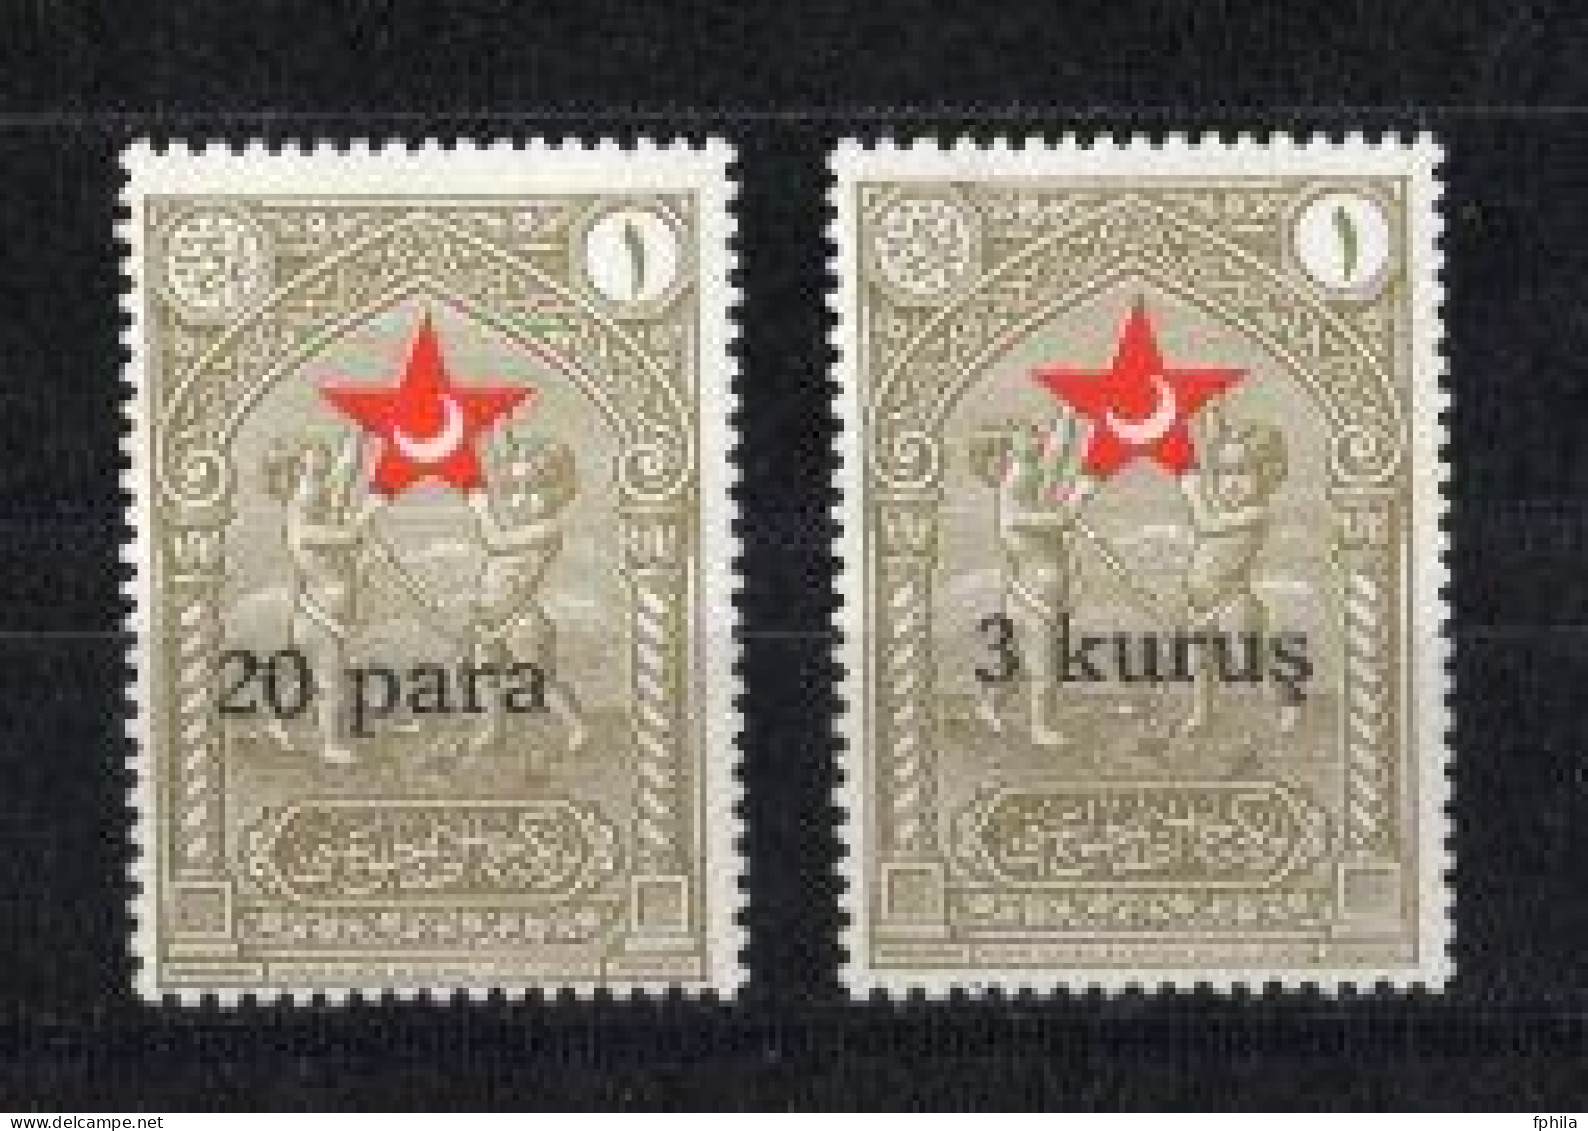 1932 TURKEY STAMPS IN AID OF THE TURKISH SOCIETY FOR THE PROTECTION OF CHILDREN SURCHARGED WITH LARGE LETTERS NO GUM - Timbres De Bienfaisance